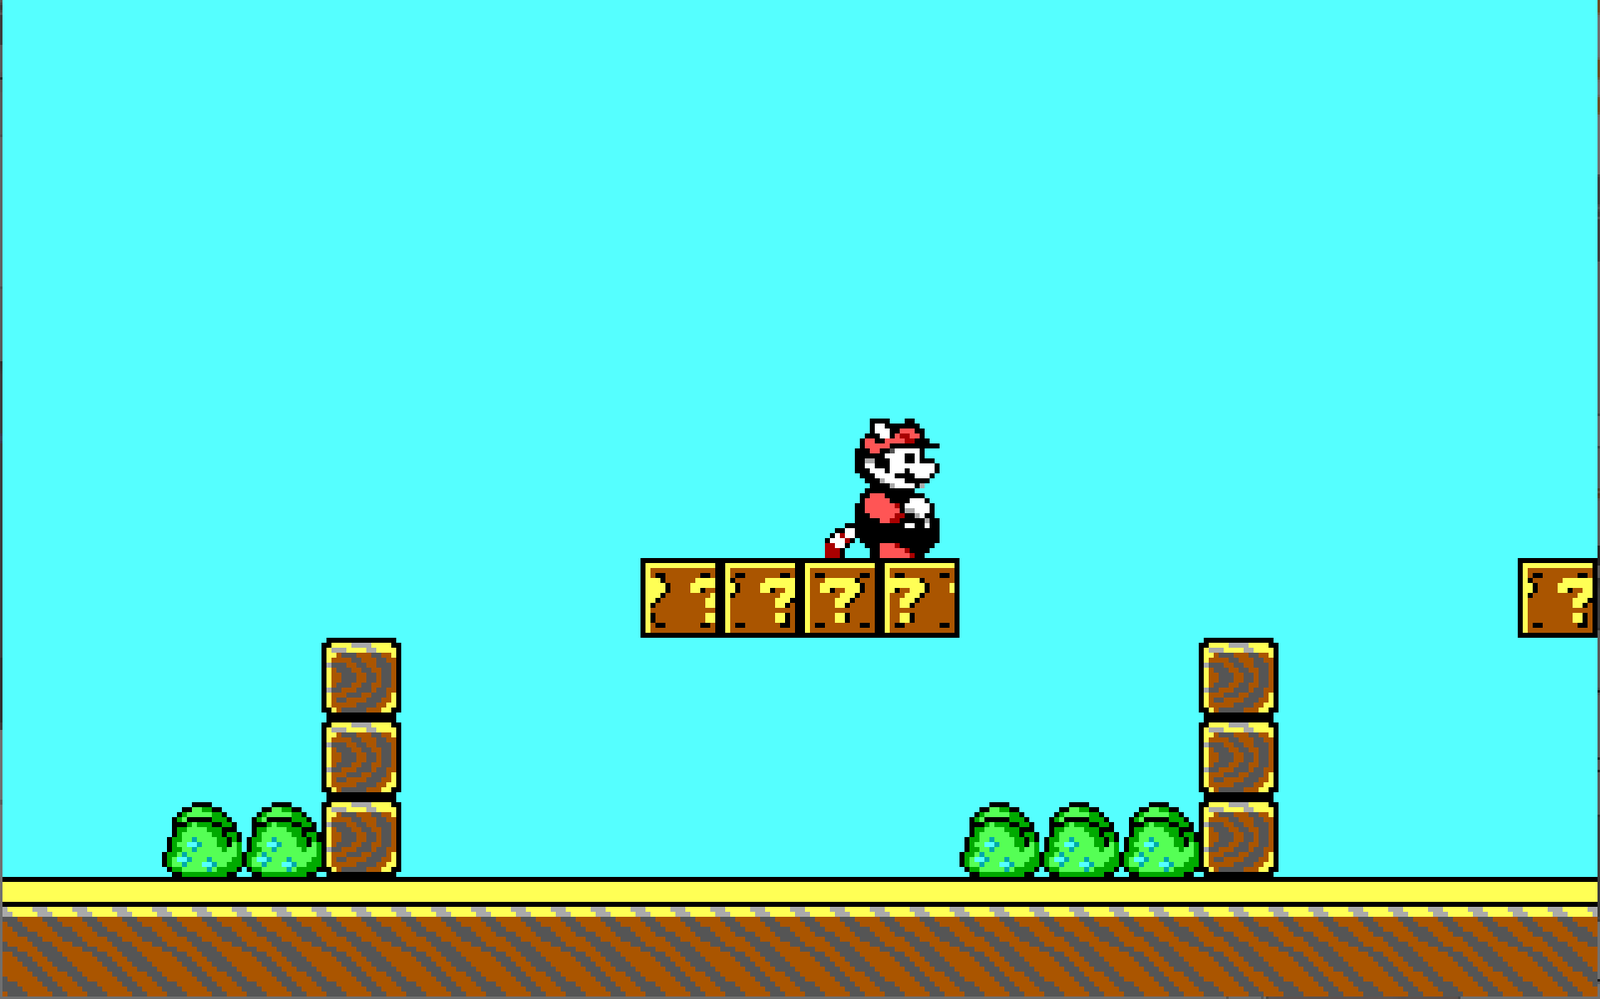 The 'Super Mario Bros.' PC Game That Wasn't